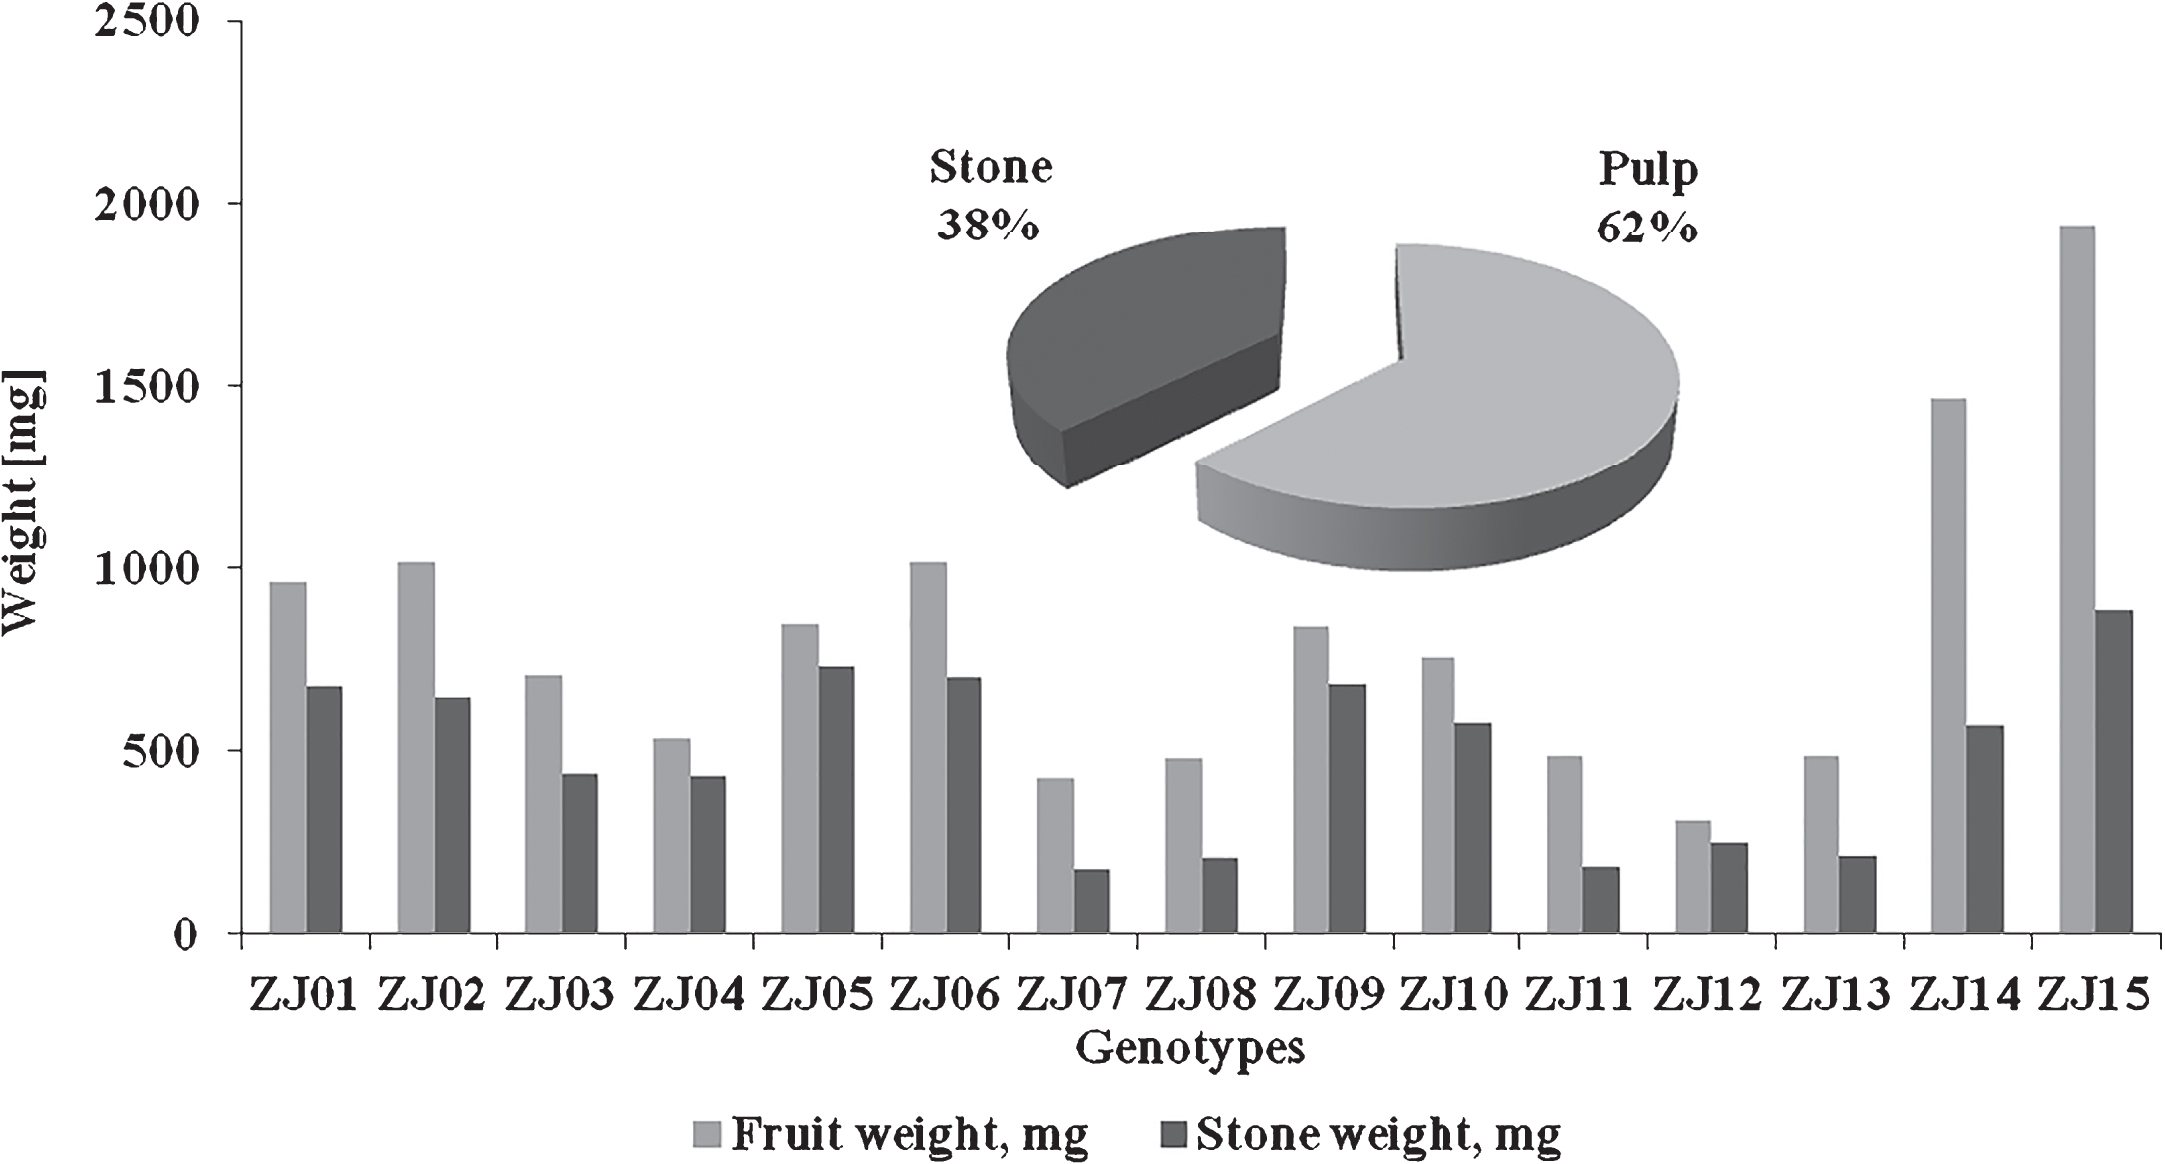 Comparison of weight of fruit and weight of stones in tested jujube genotypes.